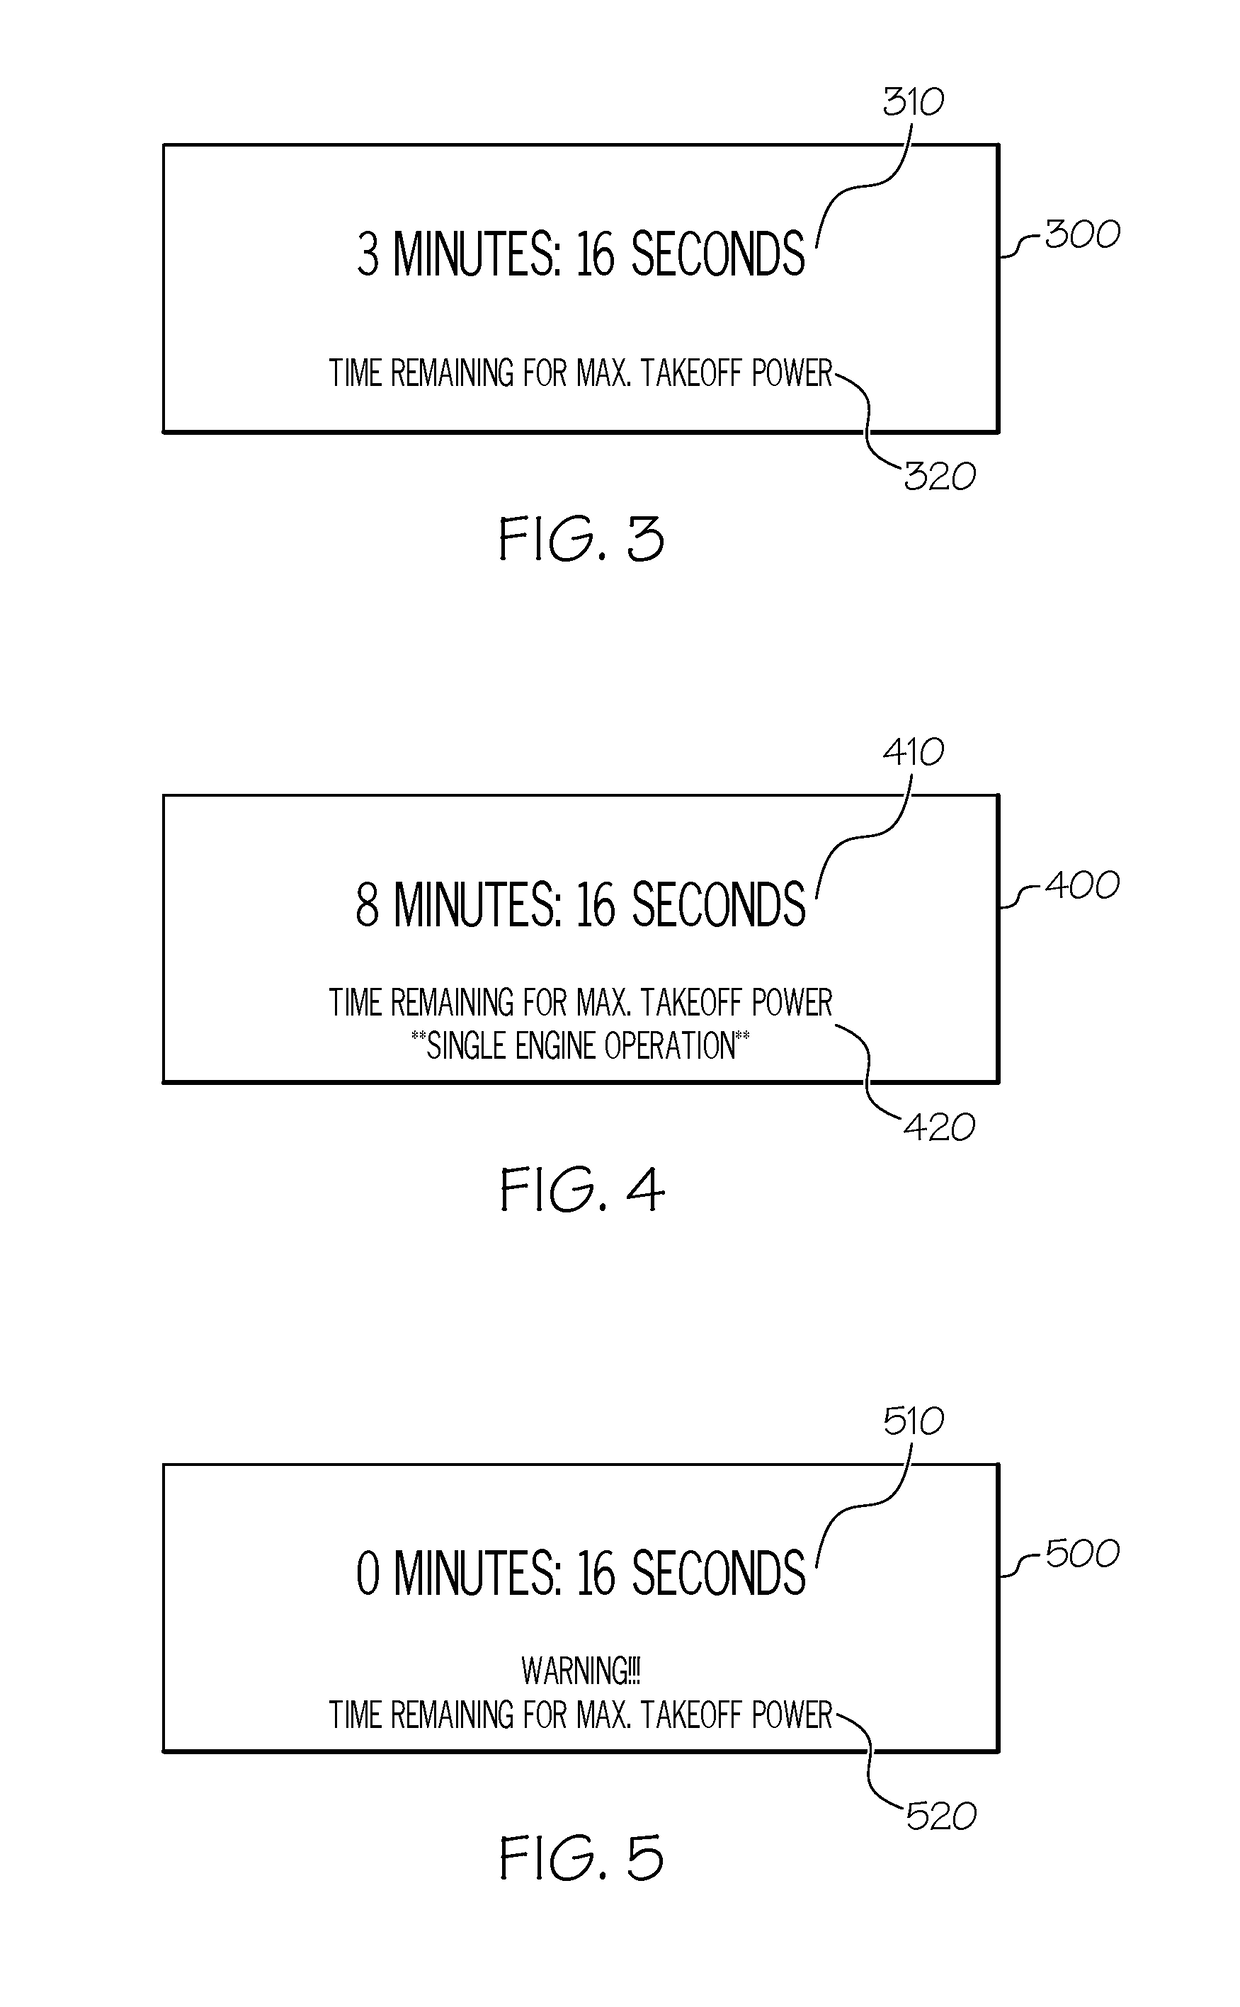 Flight deck timer management systems and methods